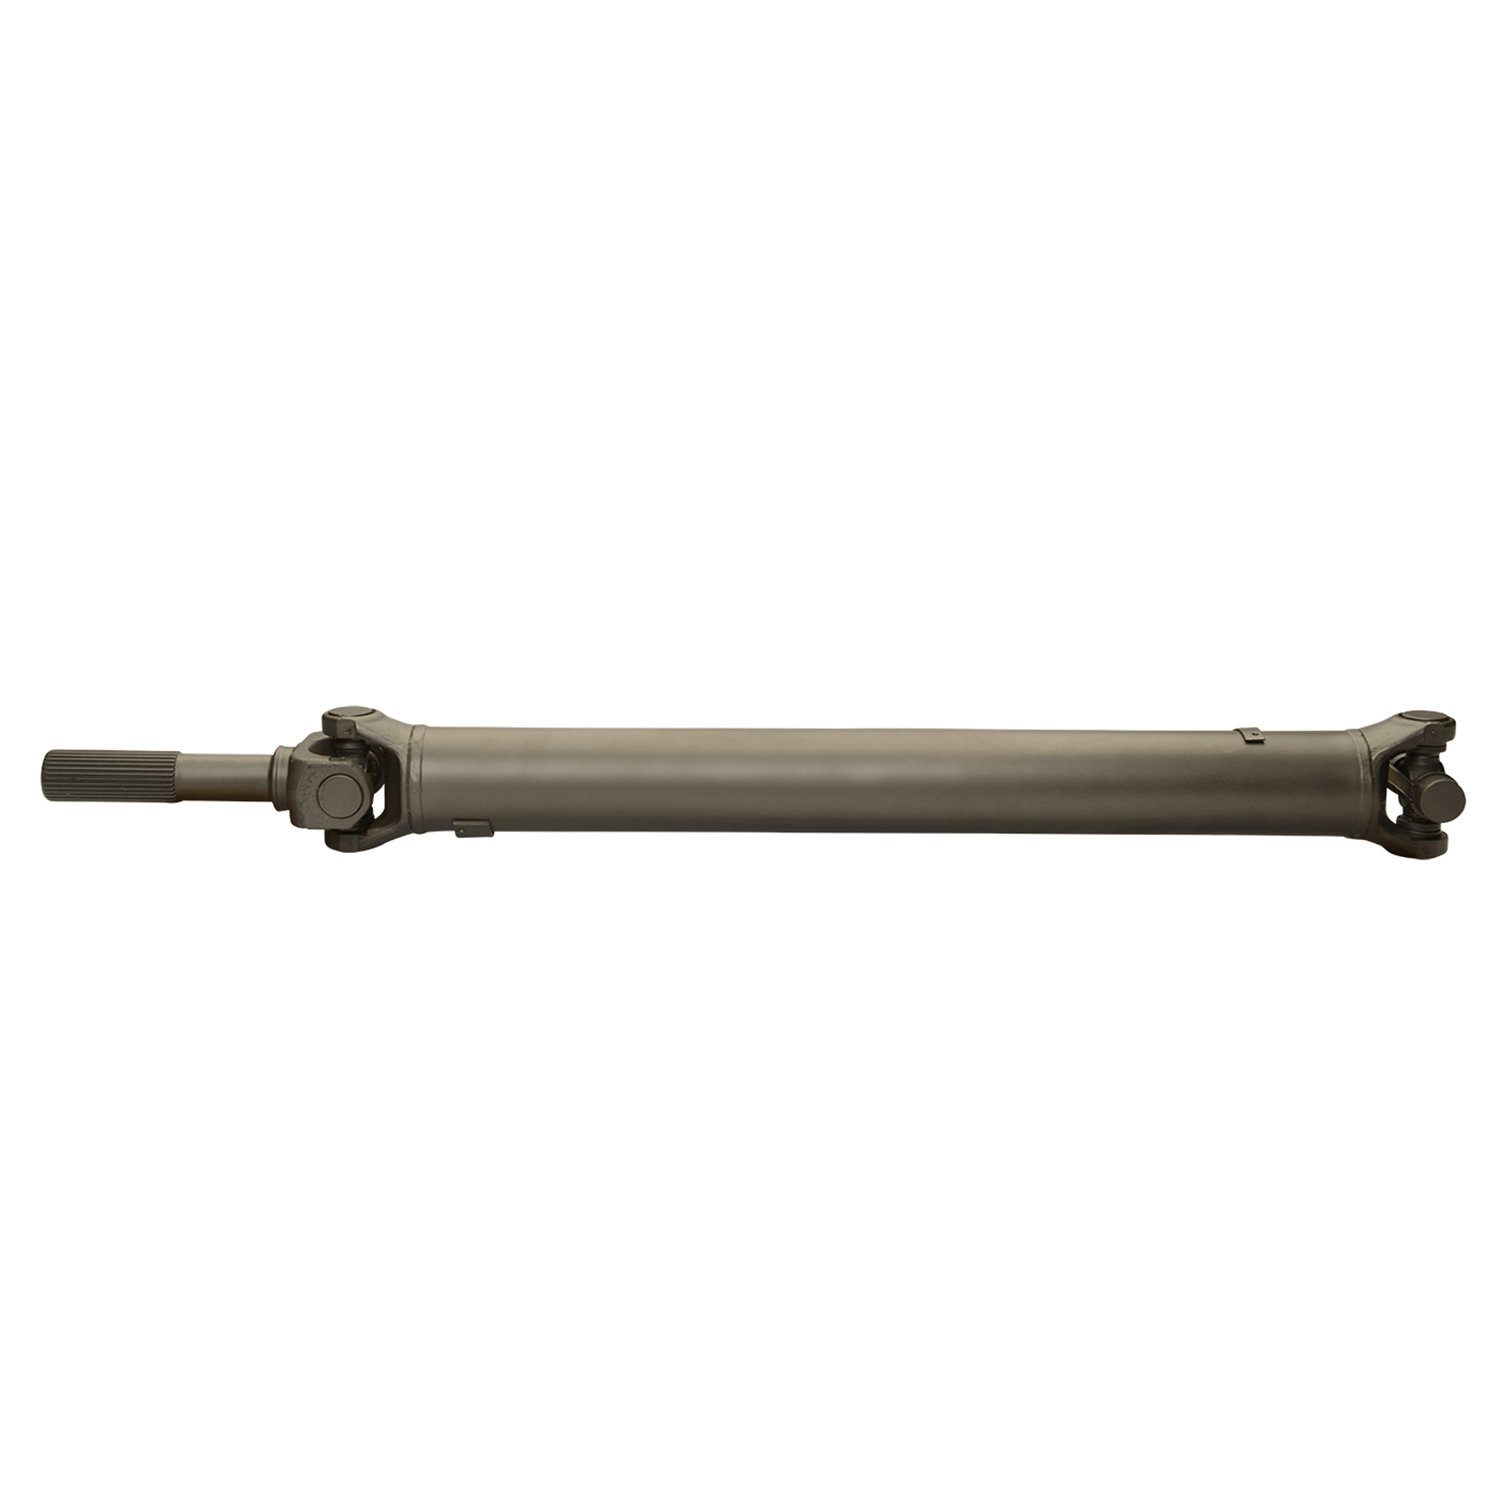 USA Standard ZDS9306 Front Driveshaft, For GM Truck And Suv, 26 in. Weld-To-Weld